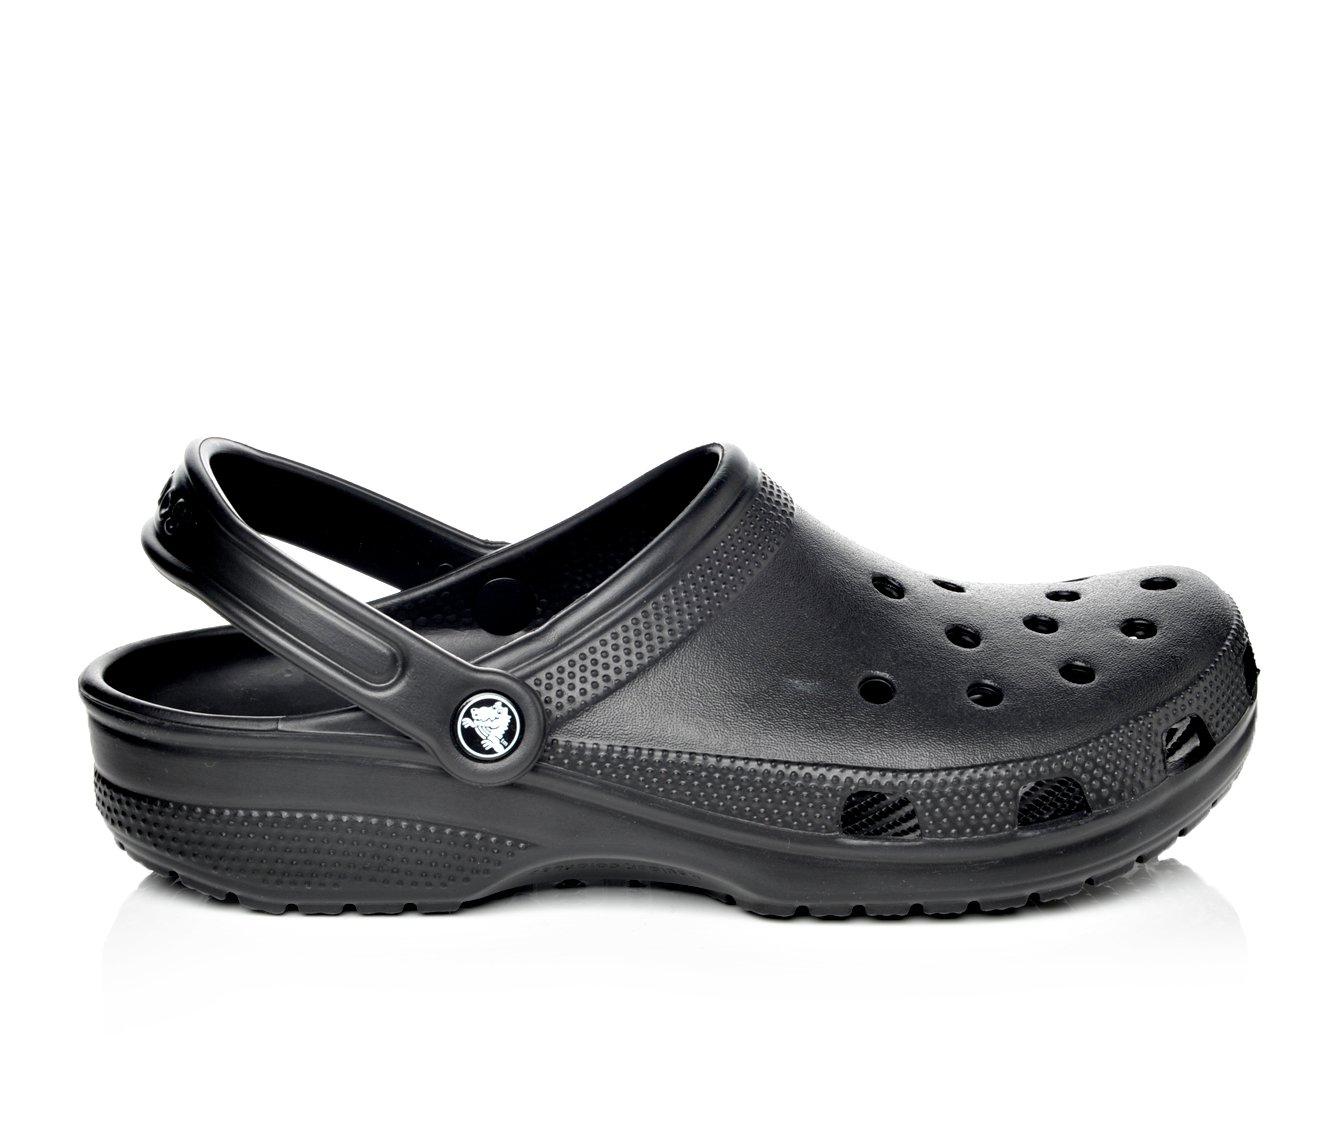 Yall know we love our crocs so it was only natural to snag these